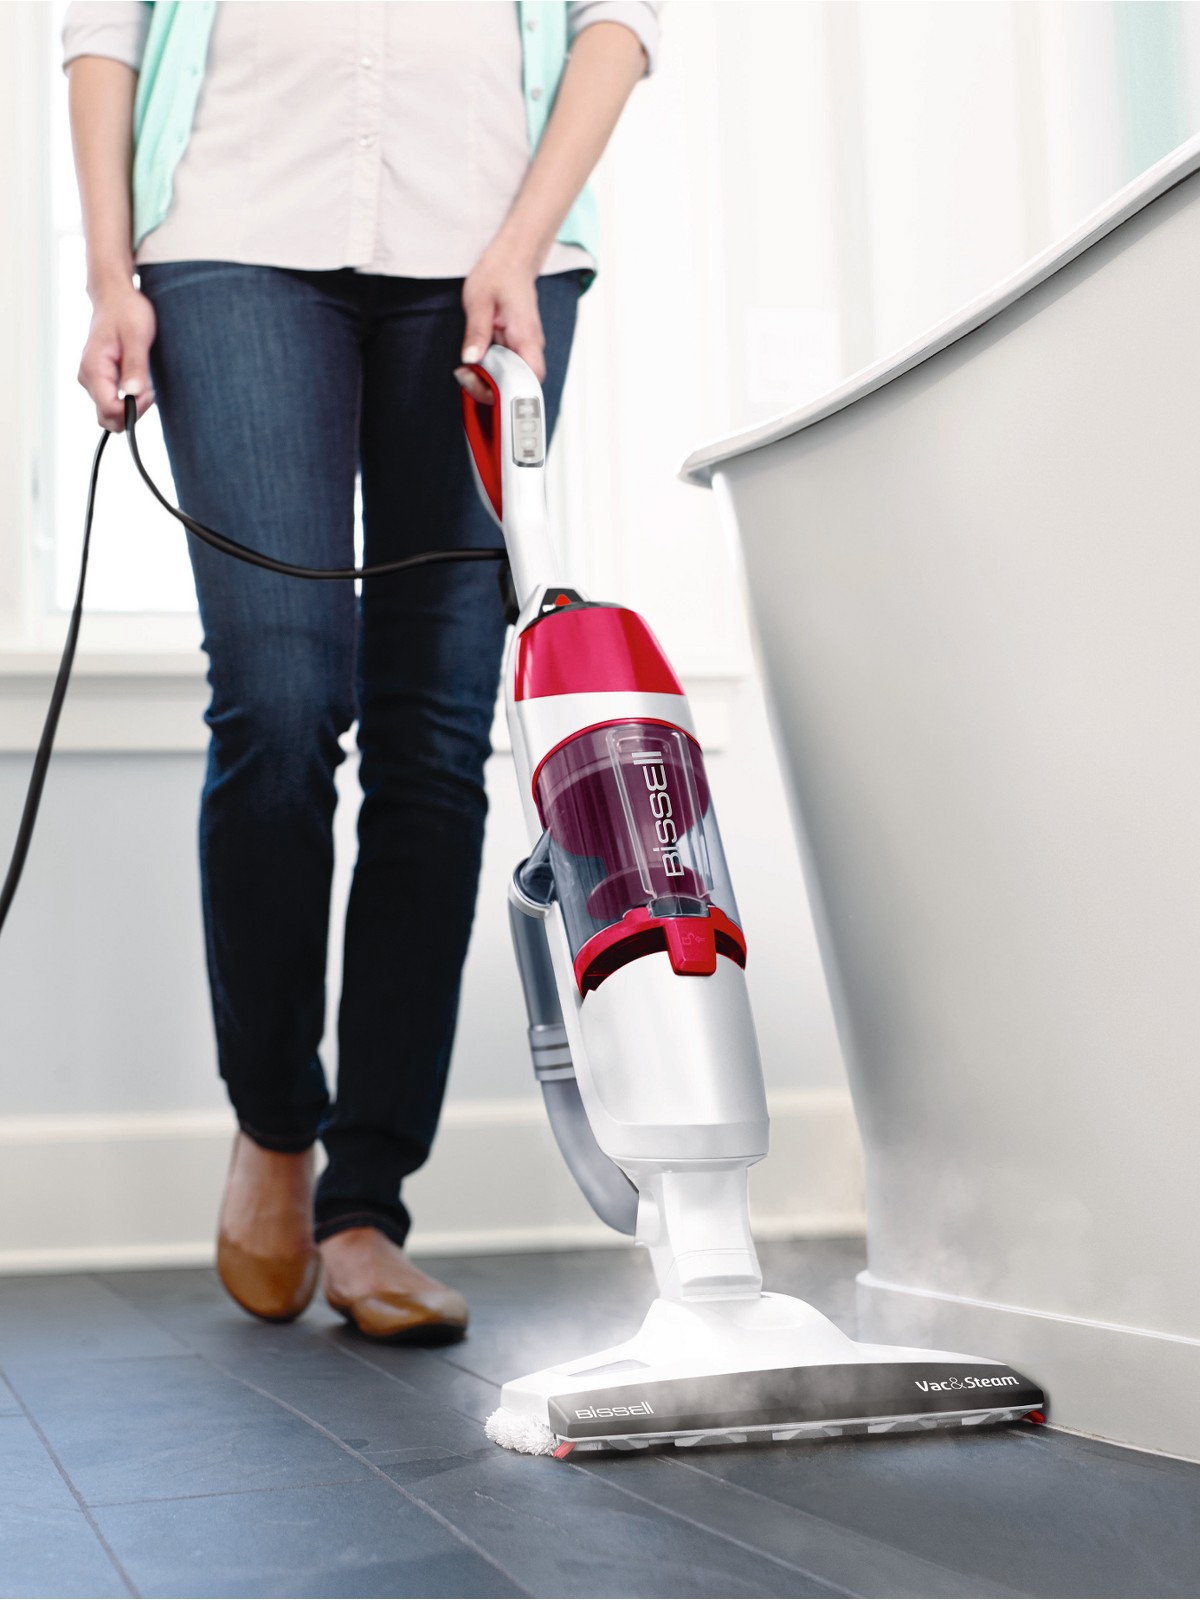 vacuum cleaner steam cleaner floor care cmf COLOR and MATERIAL